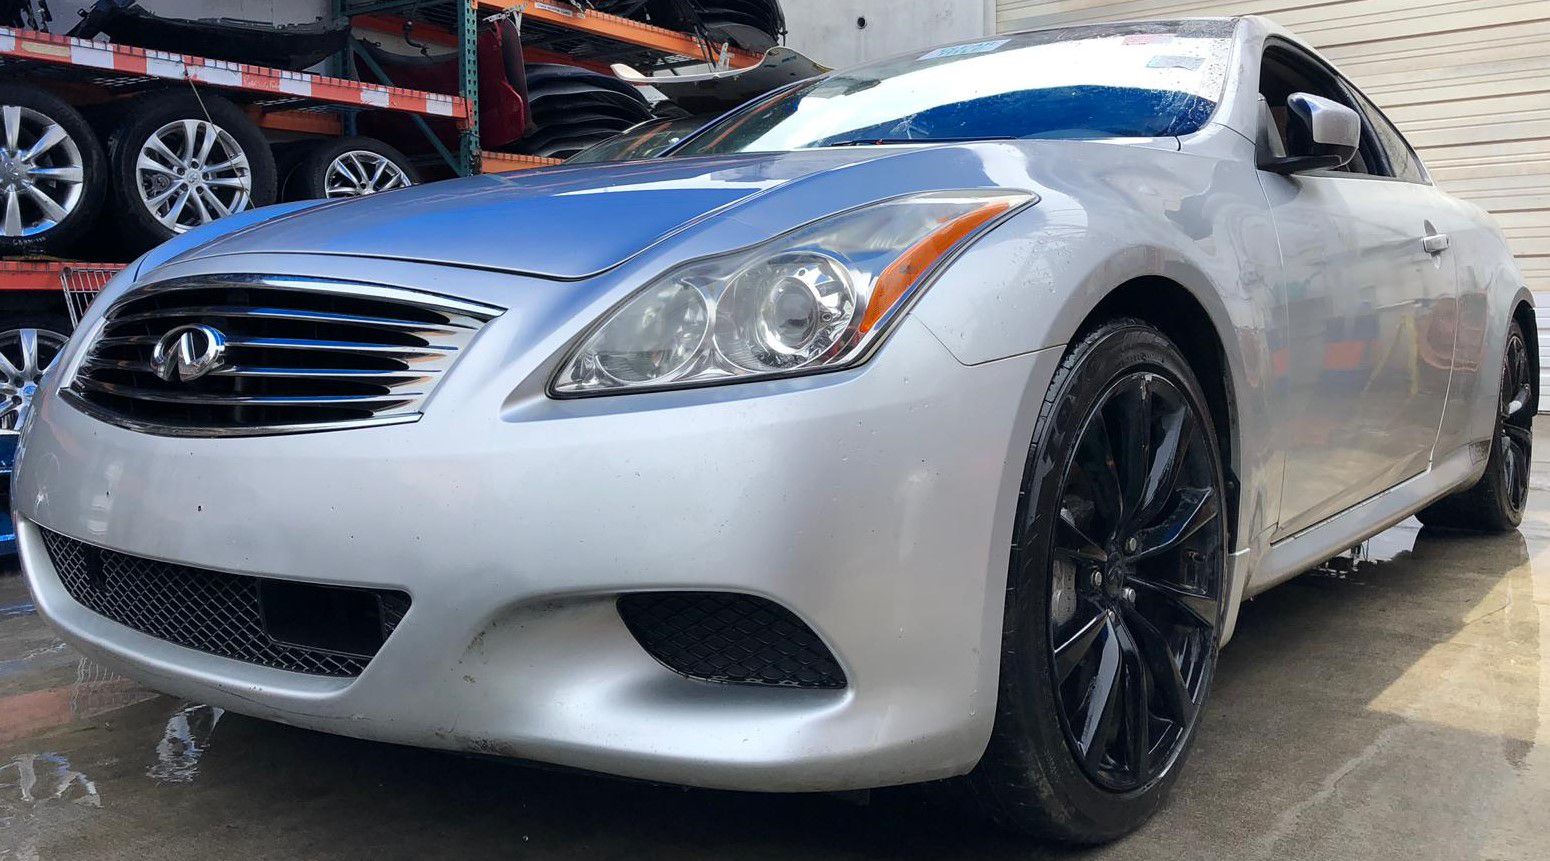 2008-2016 INFINITI G37 Q60 COUPE PART OUT!